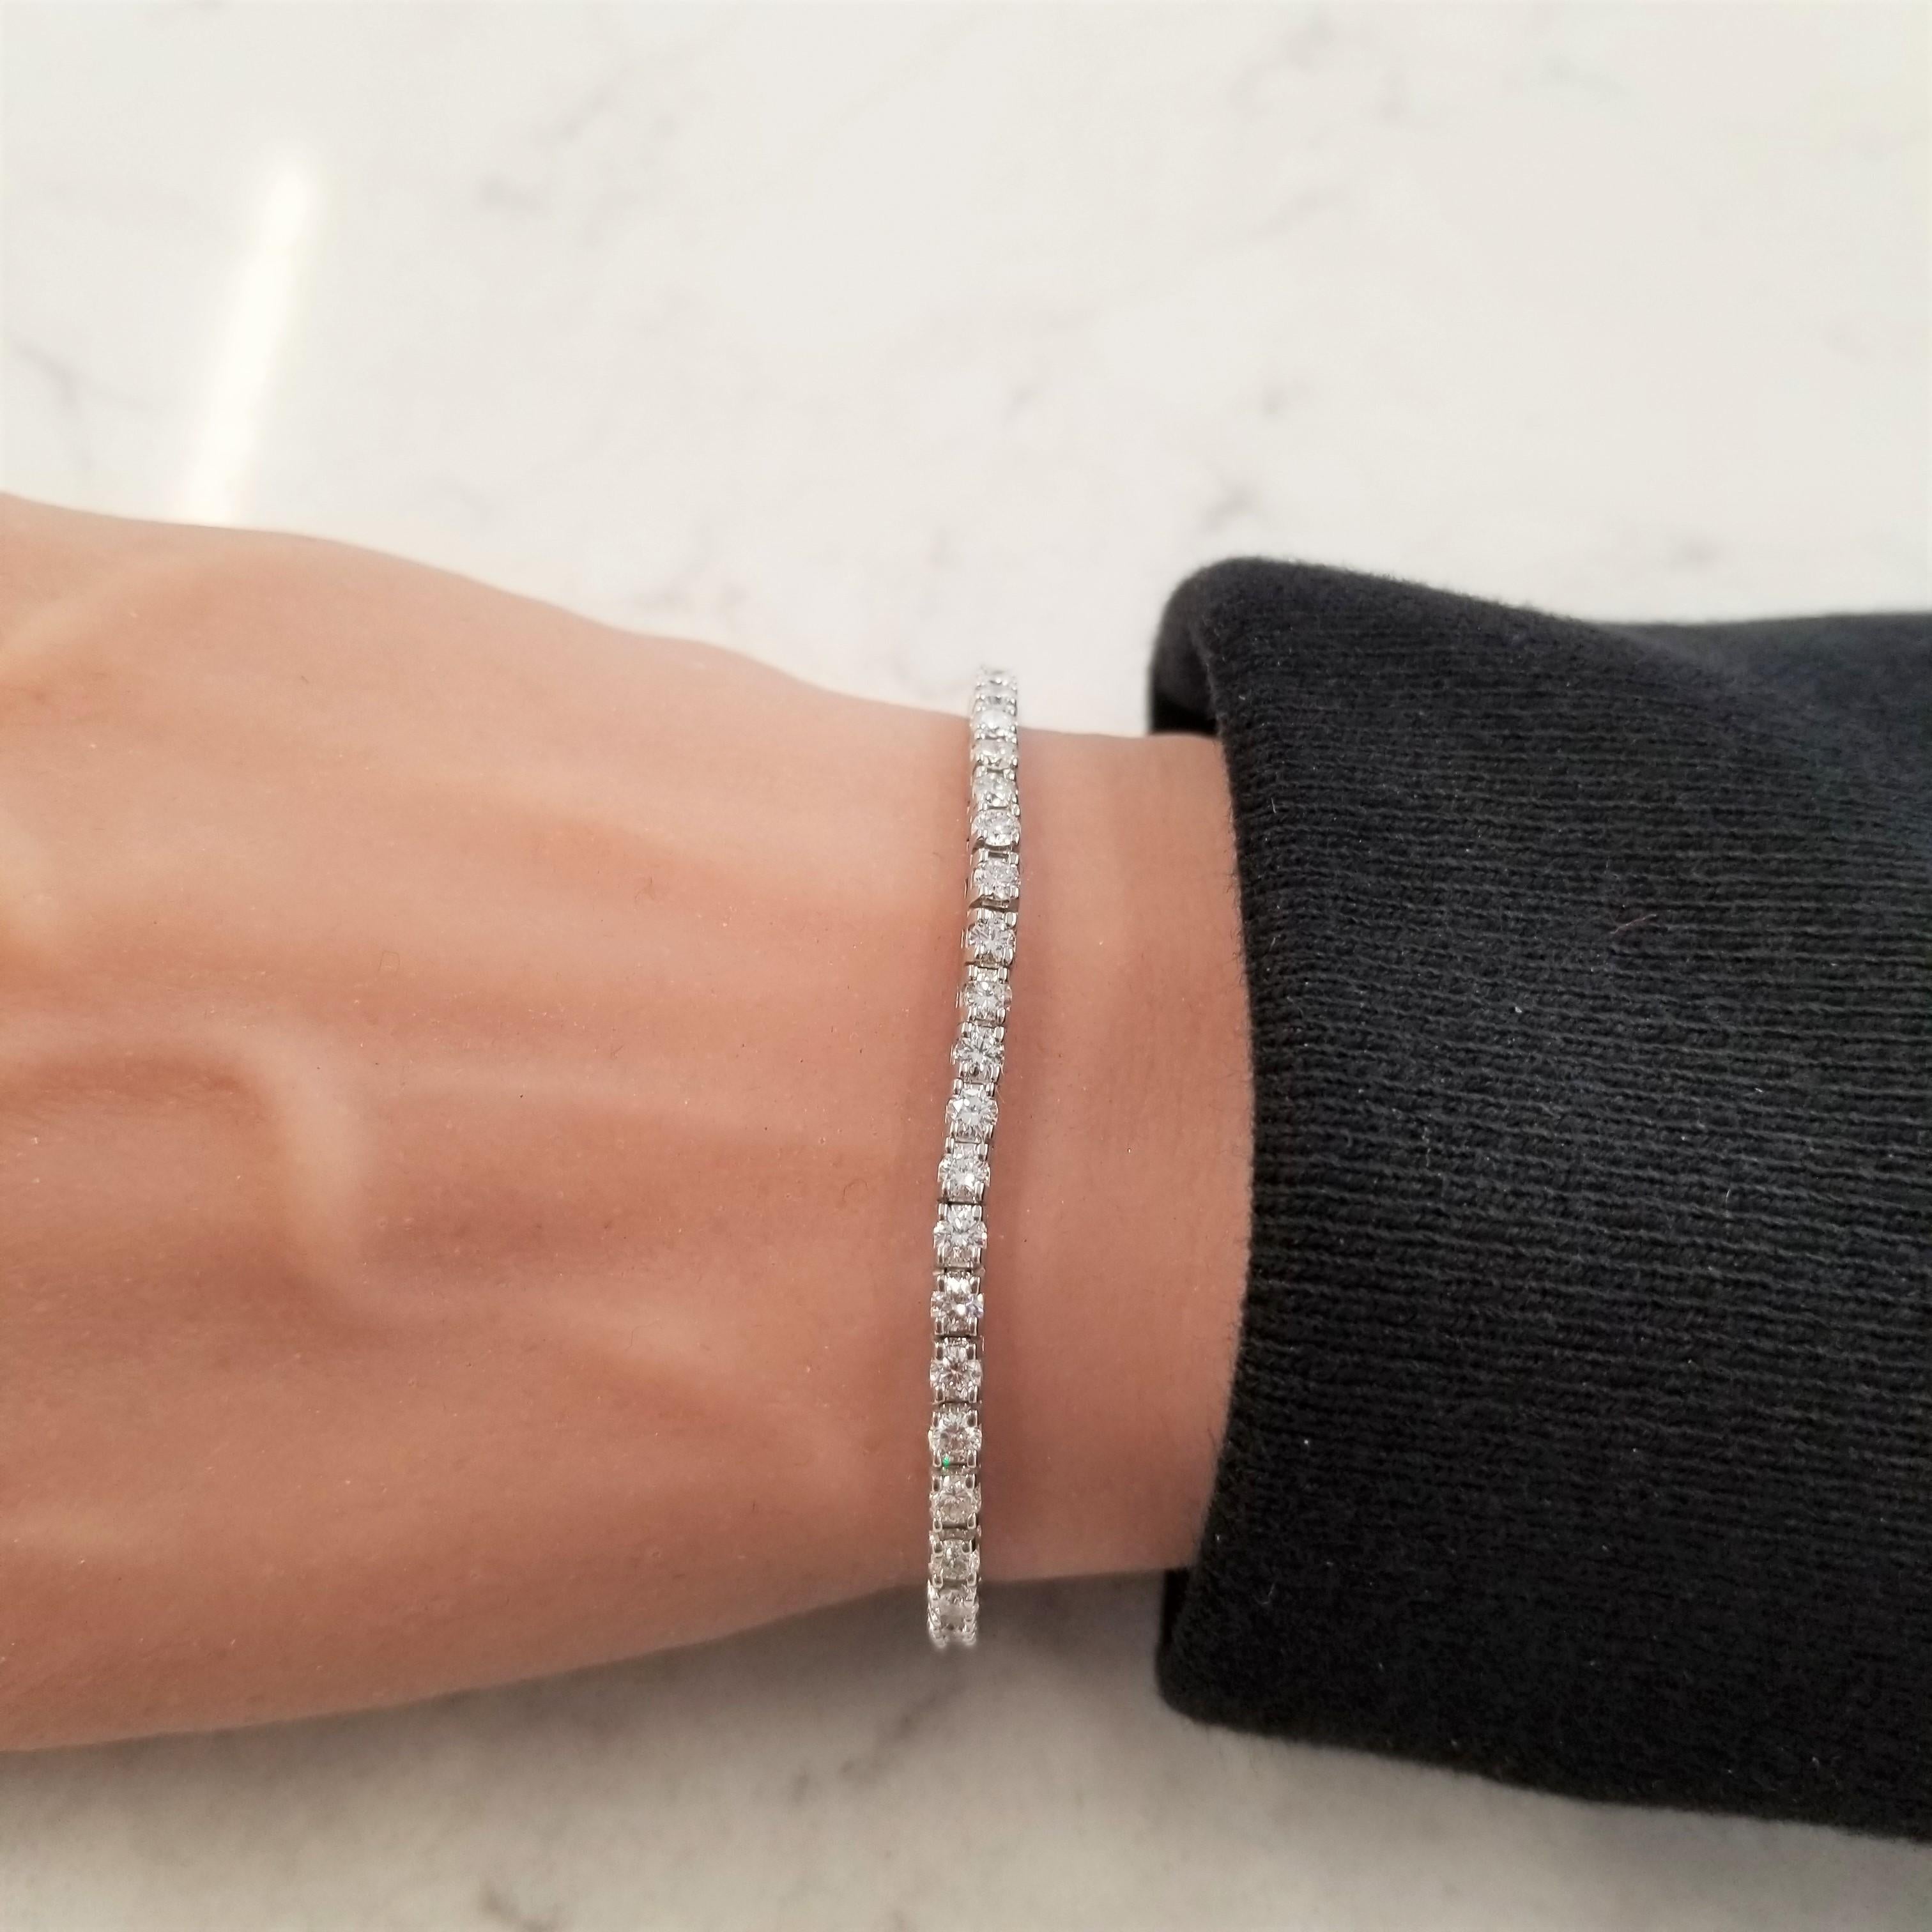 Impress your fans (or nearest acquaintances) with this versatile 3.90 carat, 4 prong set diamond 14K White Gold tennis bracelet. The round brilliants are Near Colorless and SI in purity. You don’t have to be a tennis champ to enjoy this jewelry